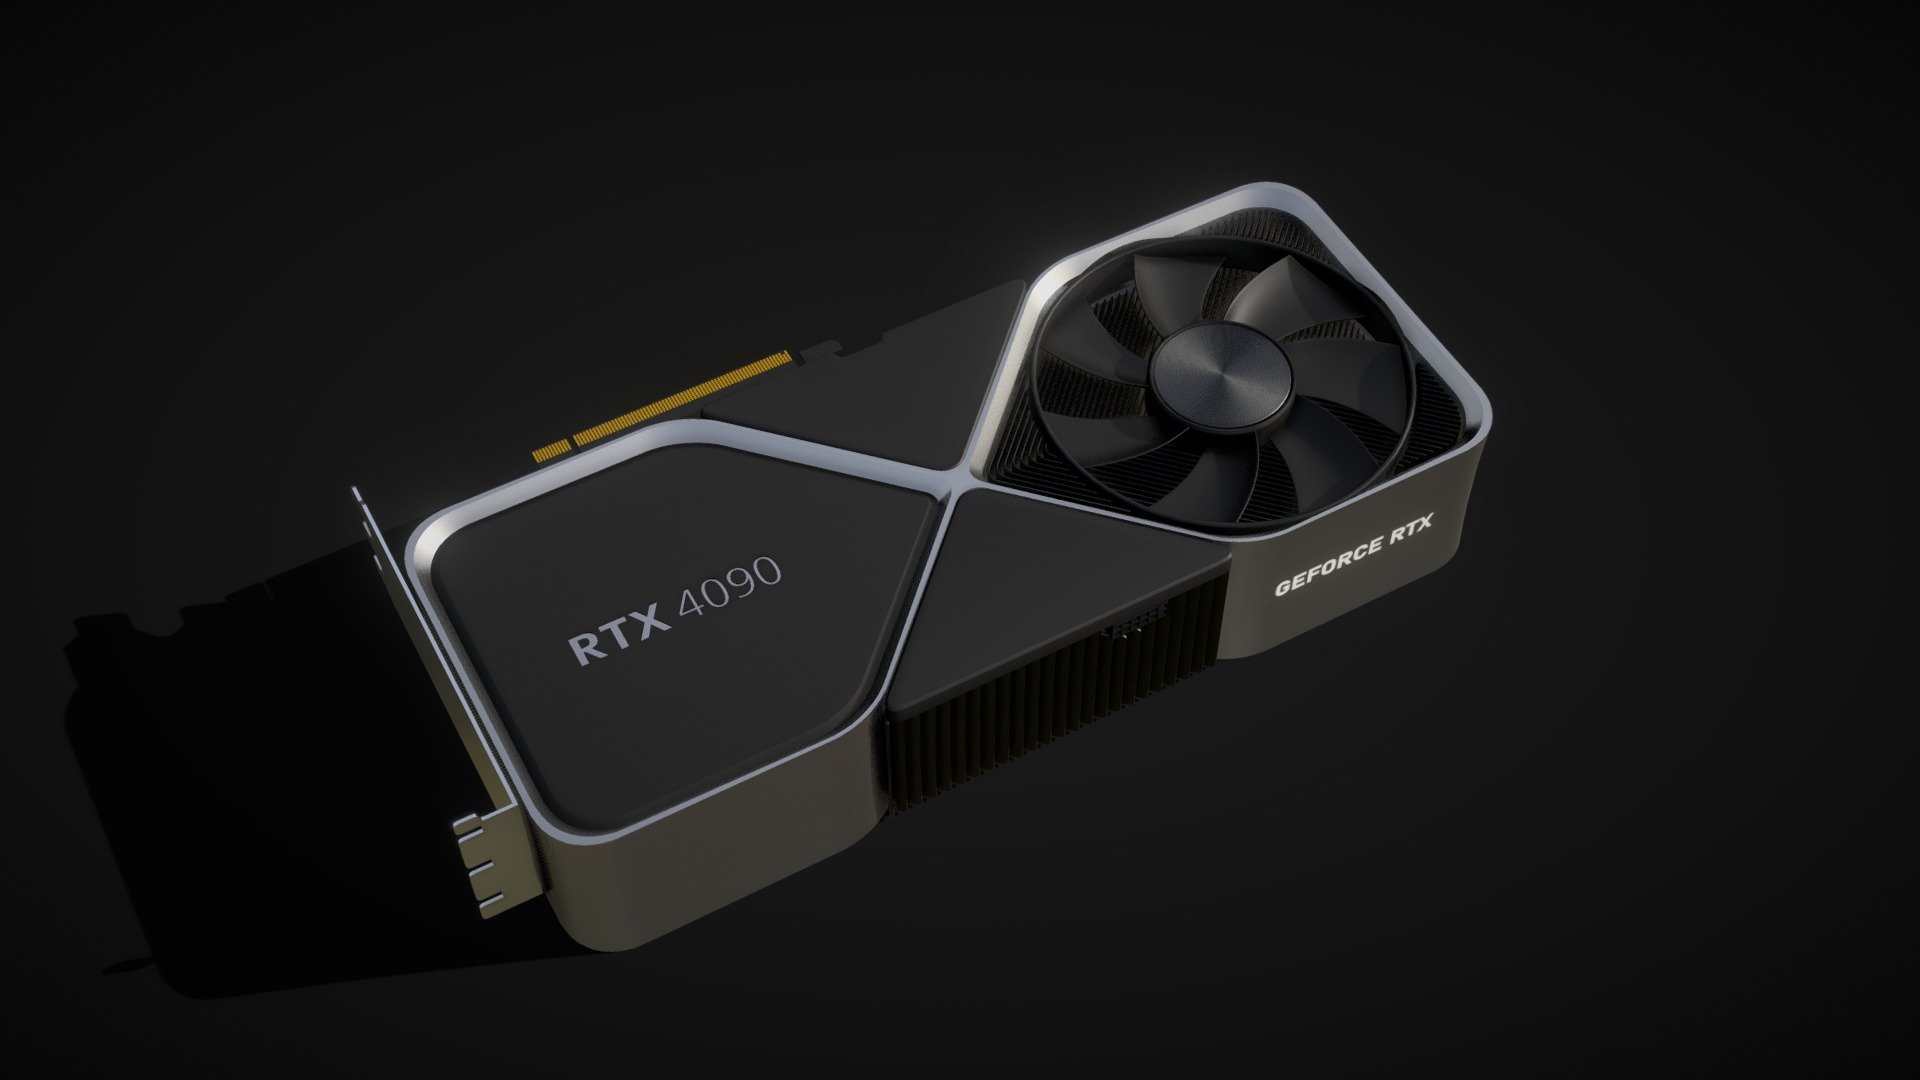 Nvidia GeForce RTX 4090 is a Powerfull GPU,
Designed and Created by Nvidia Geforce.

It is set to relese in October 2022 3d model